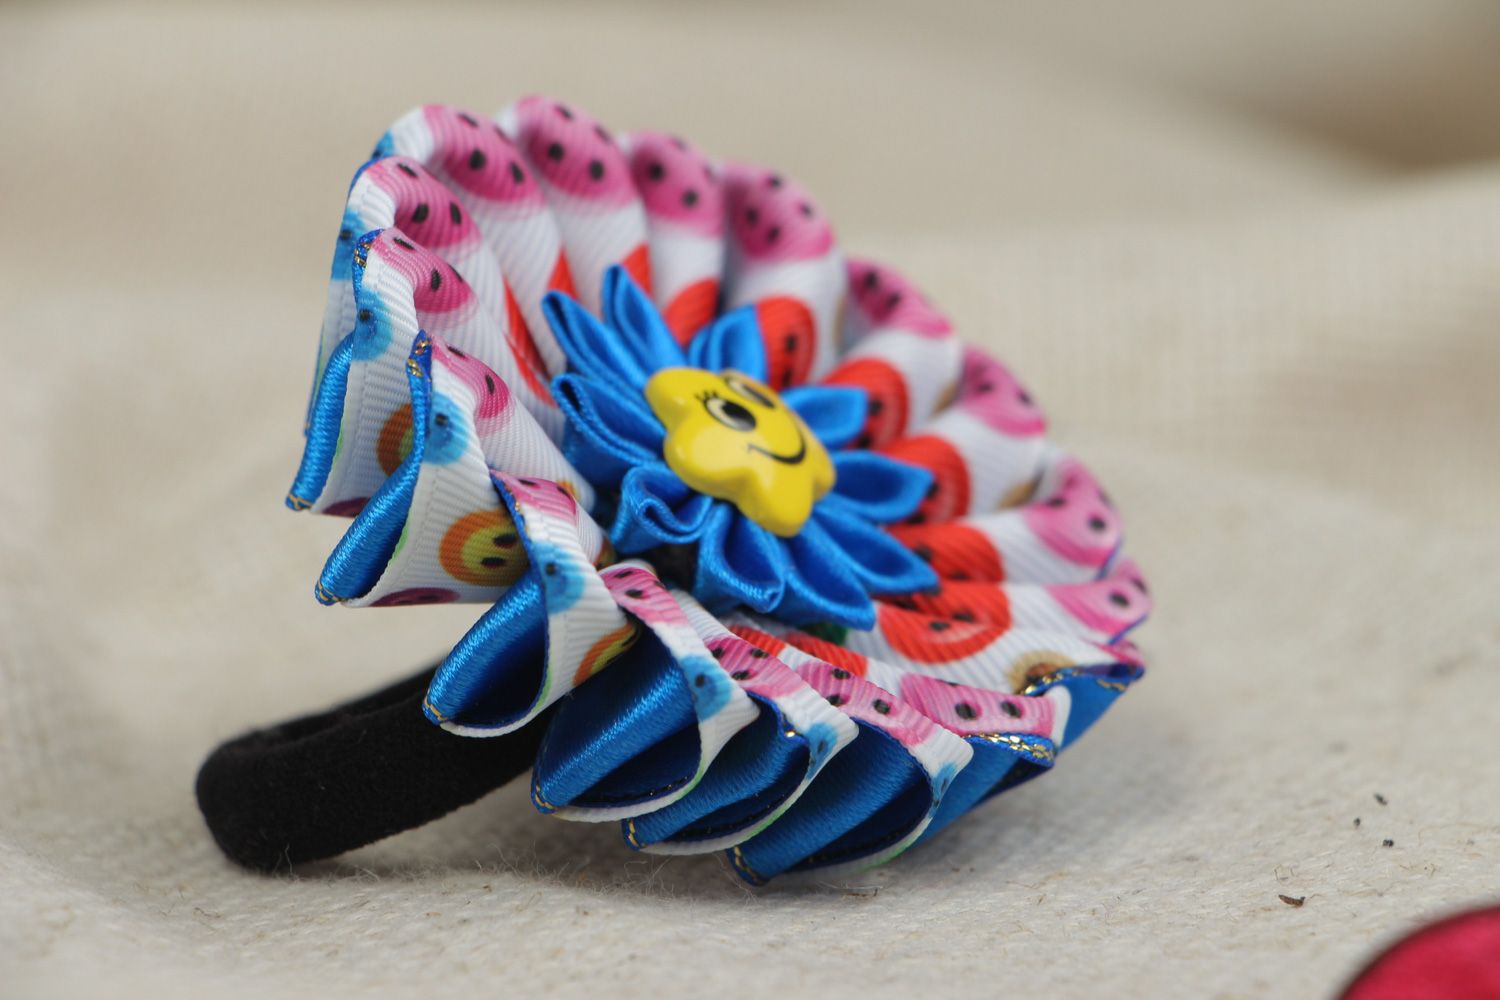 Handmade motley hair tie with volume kanzashi flower made of rep and satin ribbons photo 5